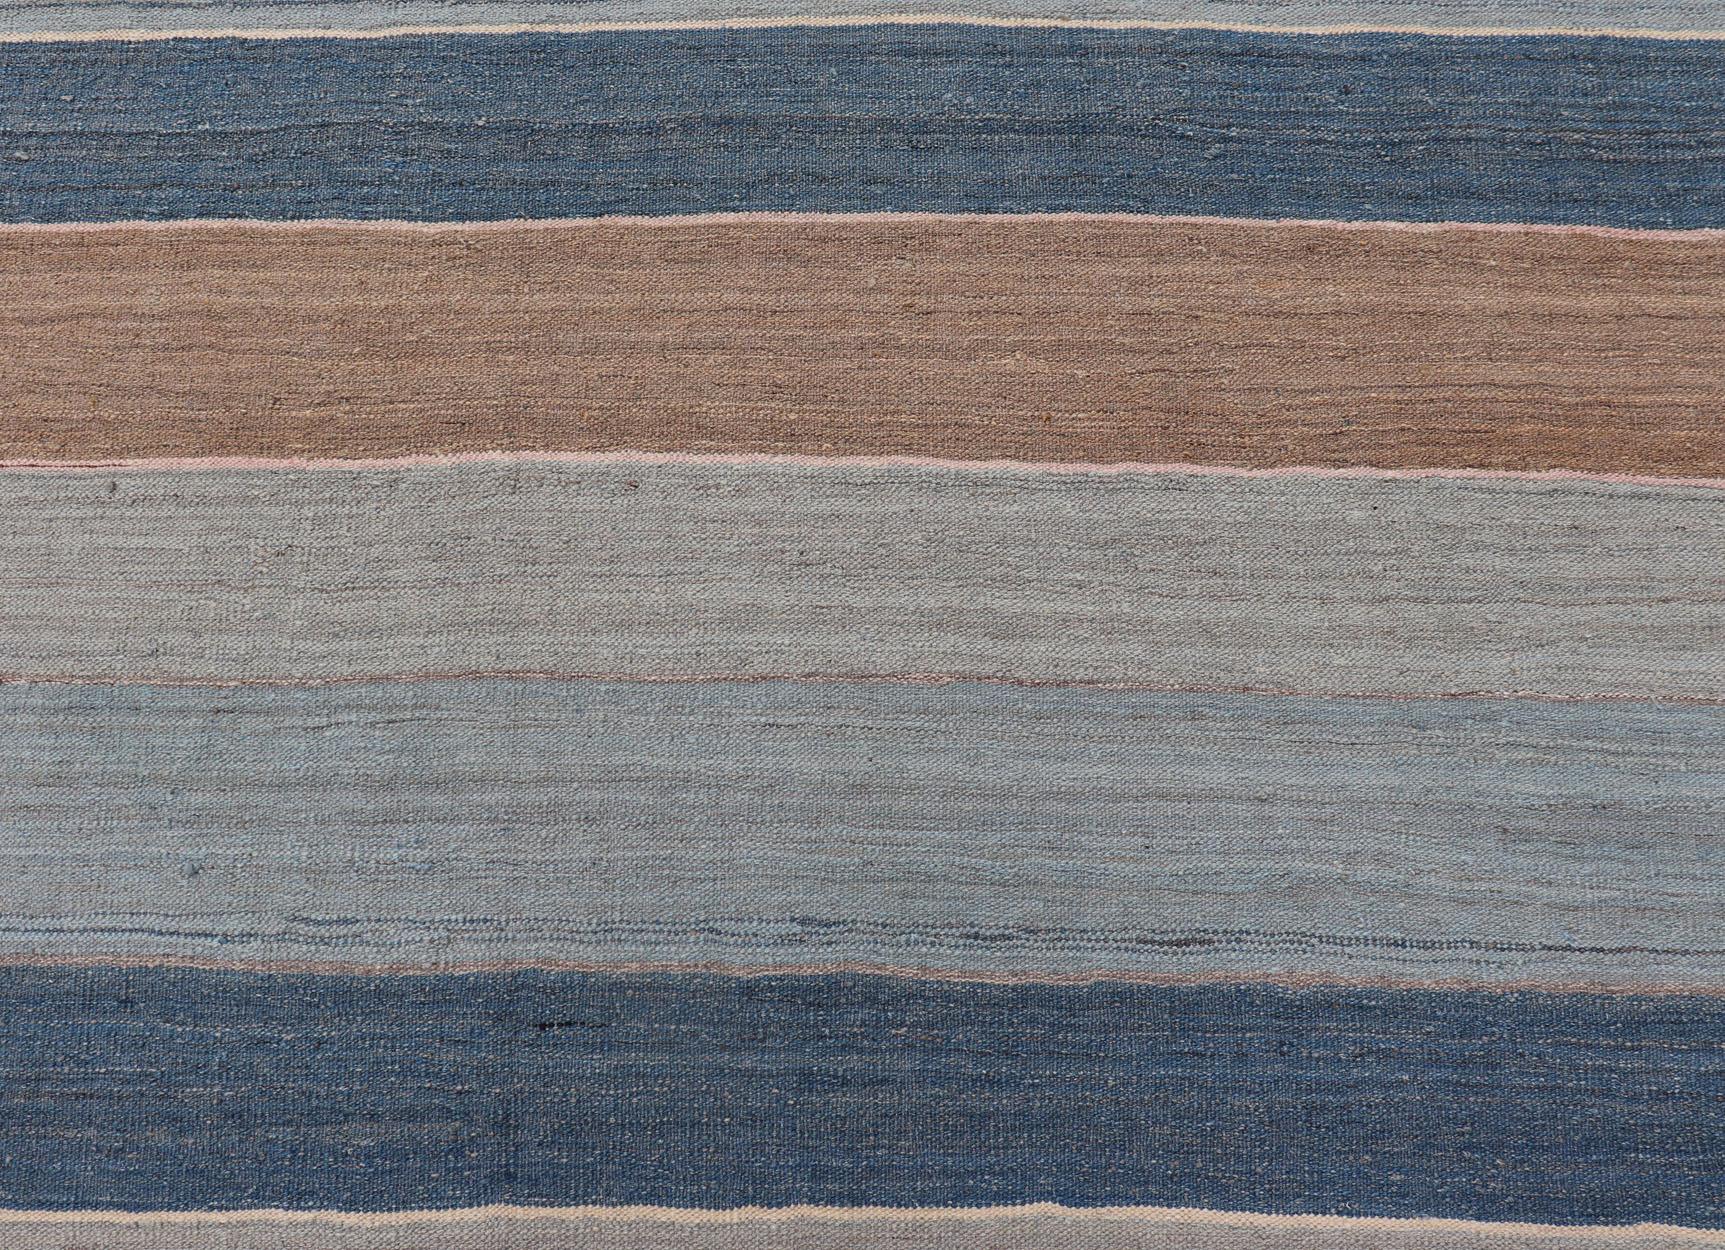 Modern Kilim Rug with Large Stripes in Shades of Blues, Brown, Gray For Sale 1